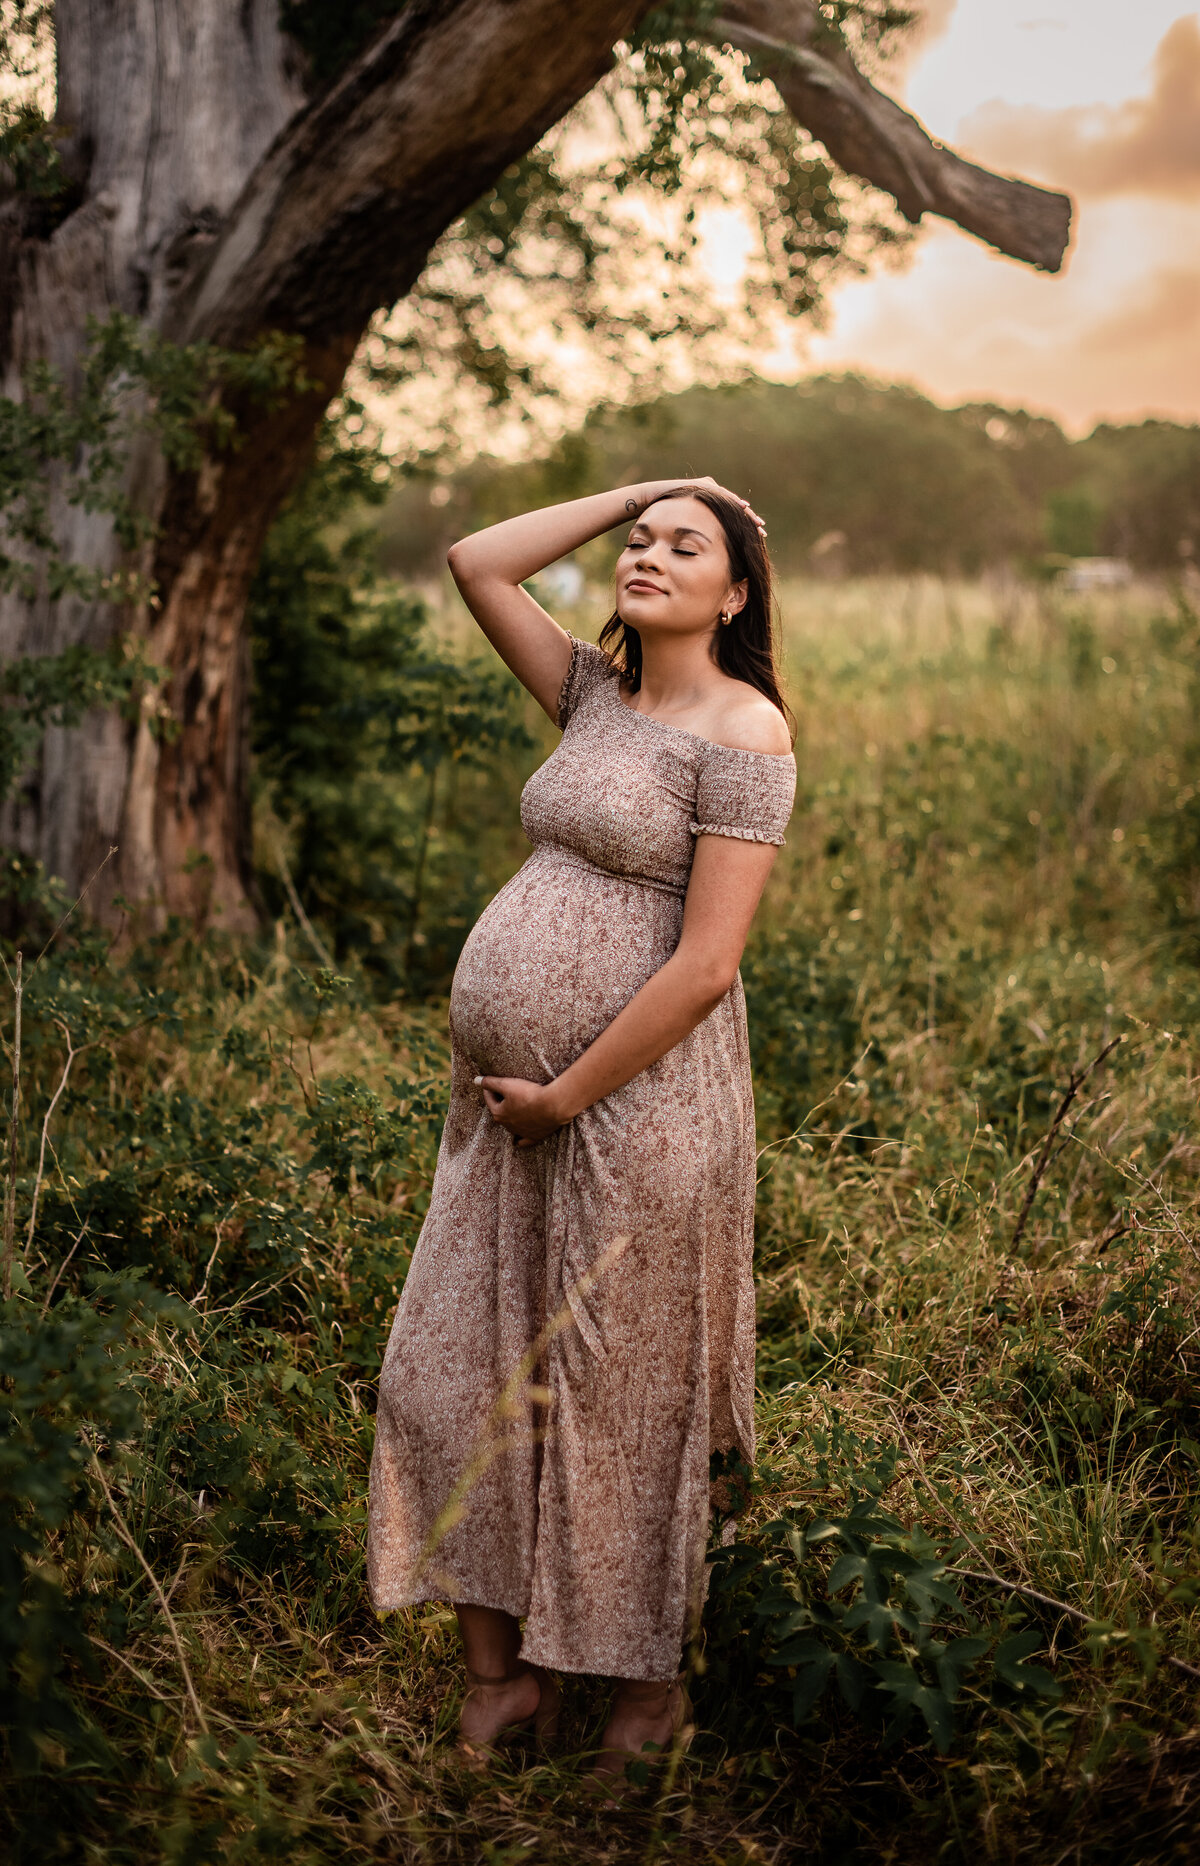 A pregnant woman holds her belly bump and looks toward the sky with her eyes closed.